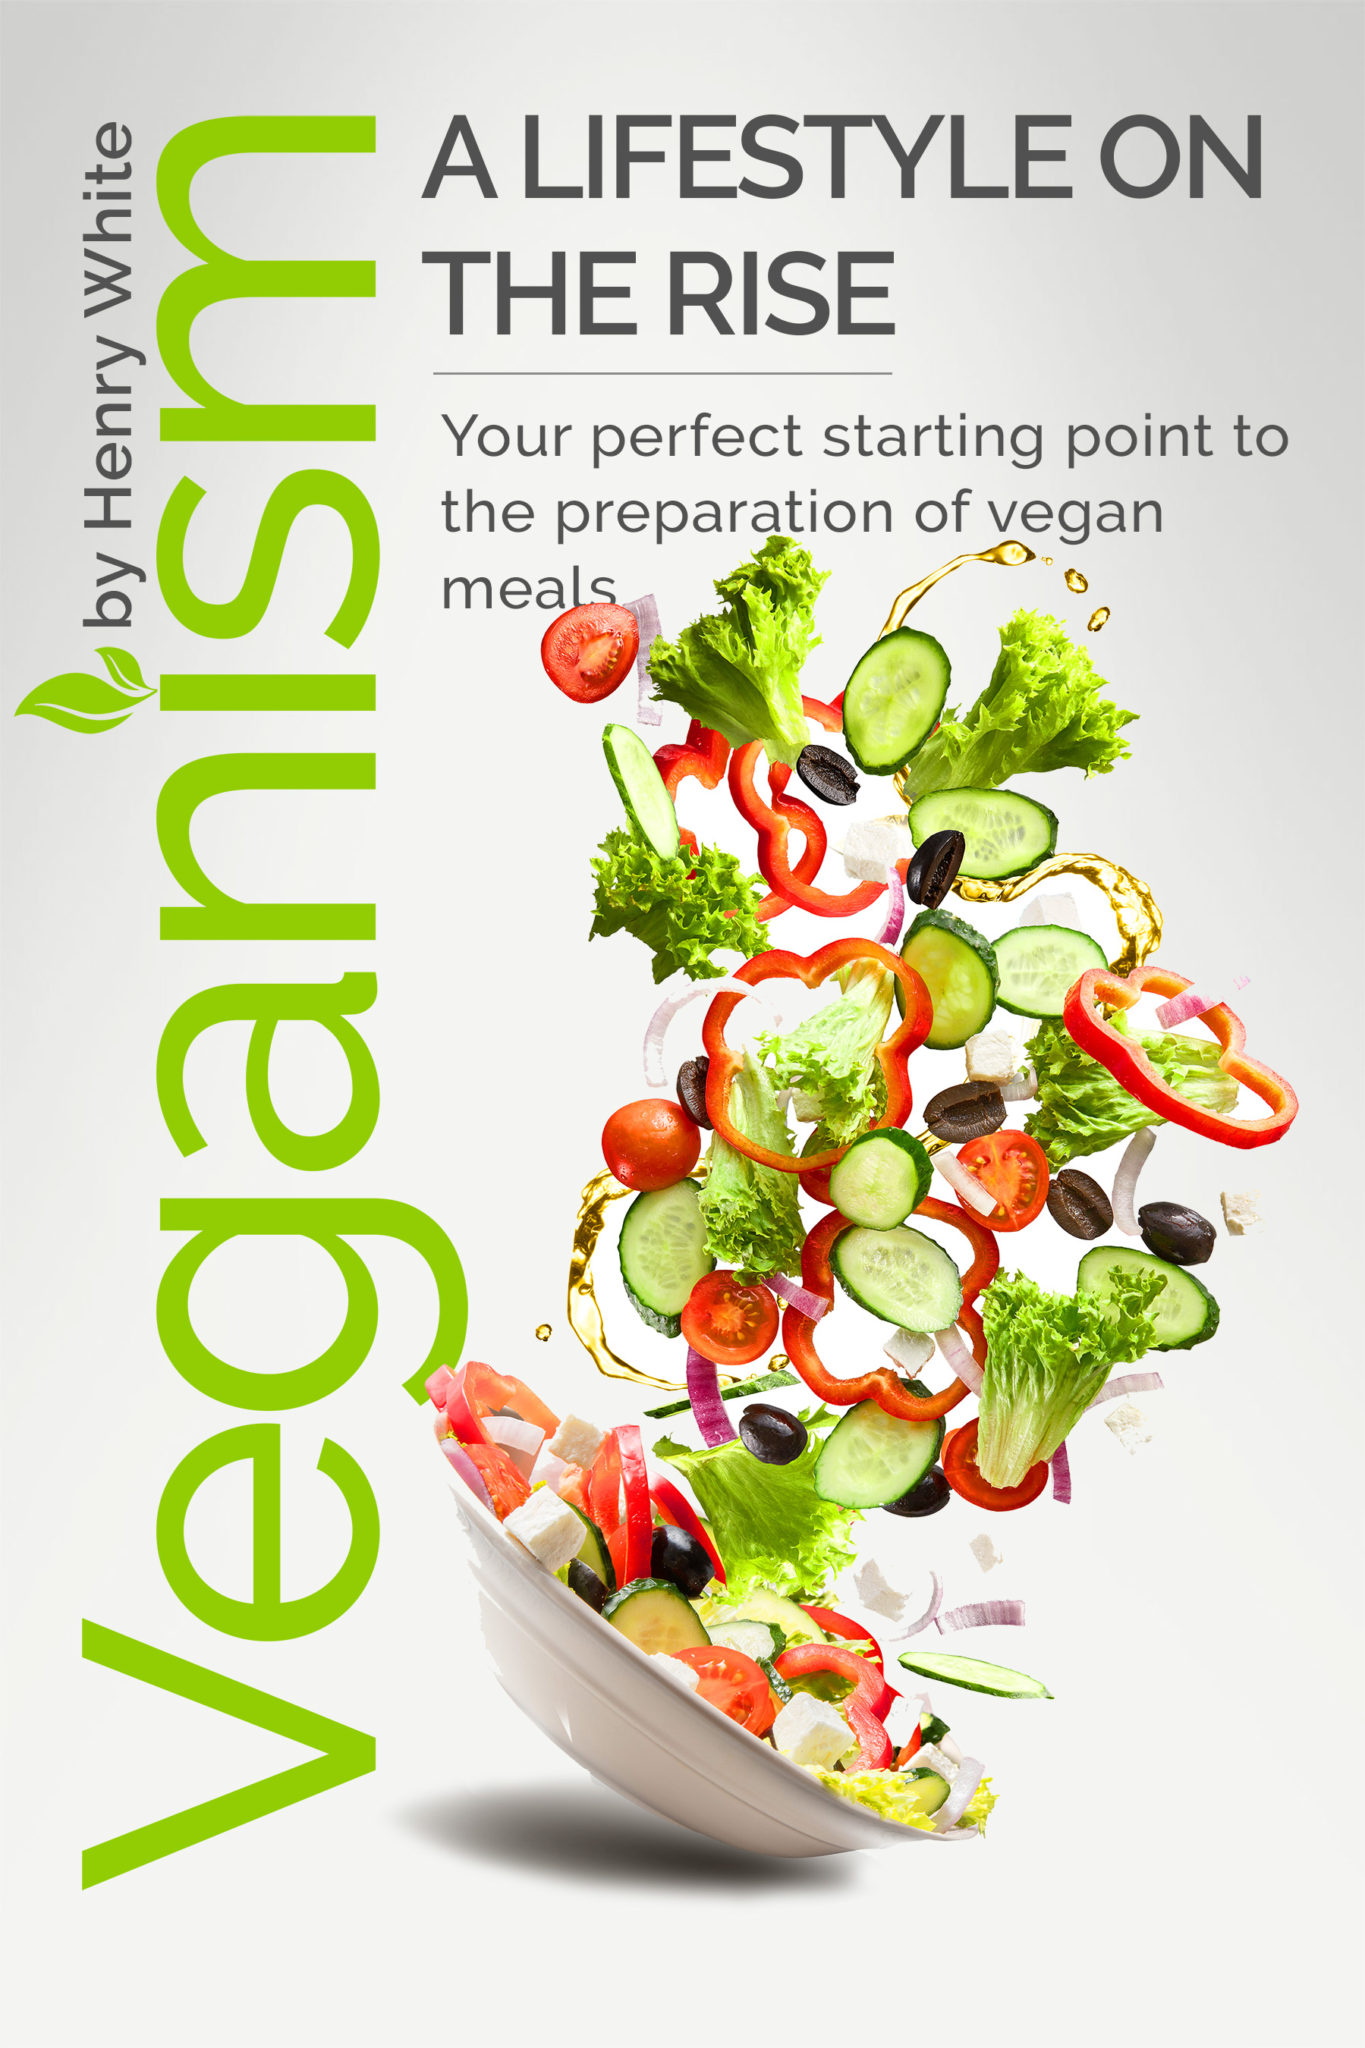 FREE: Veganism. A lifestyle on the rise. by Henry White